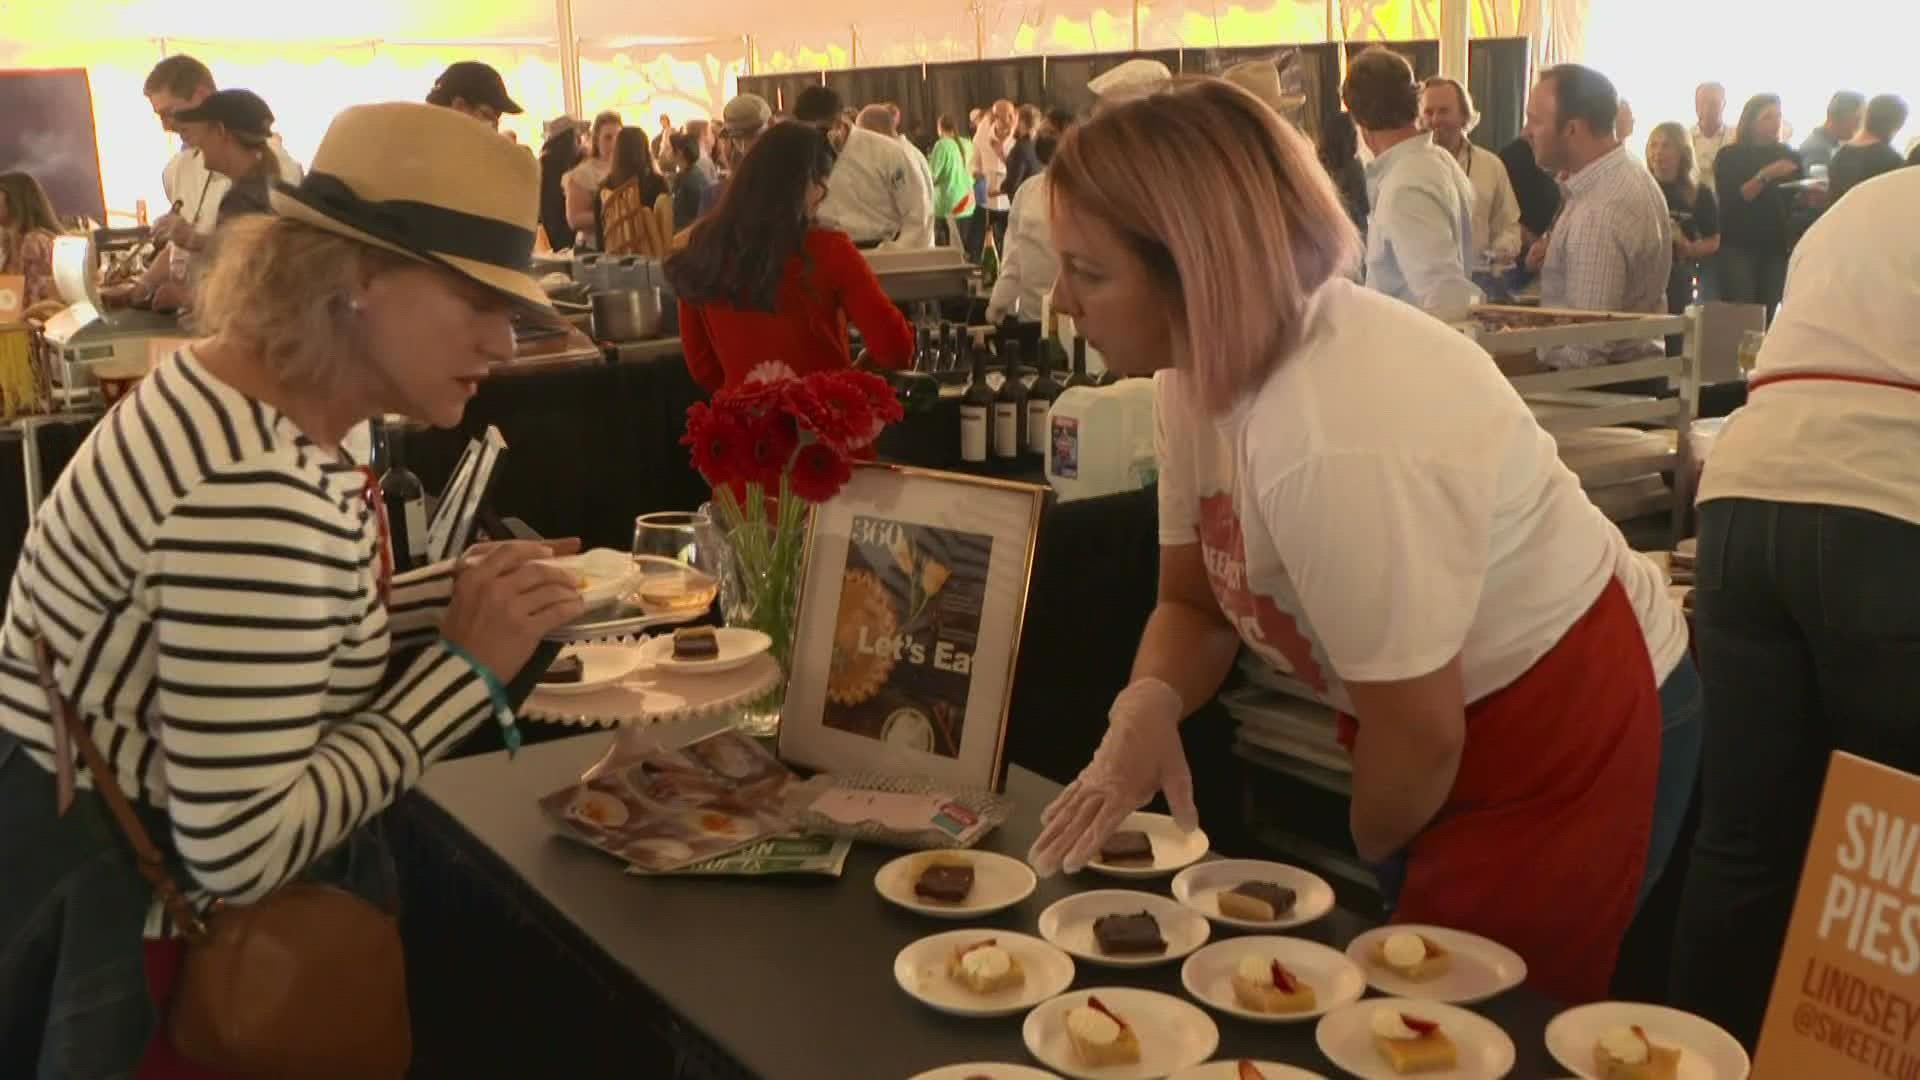 After a two-year hiatus, the Fort Worth Food and Wine Festival returns this weekend.